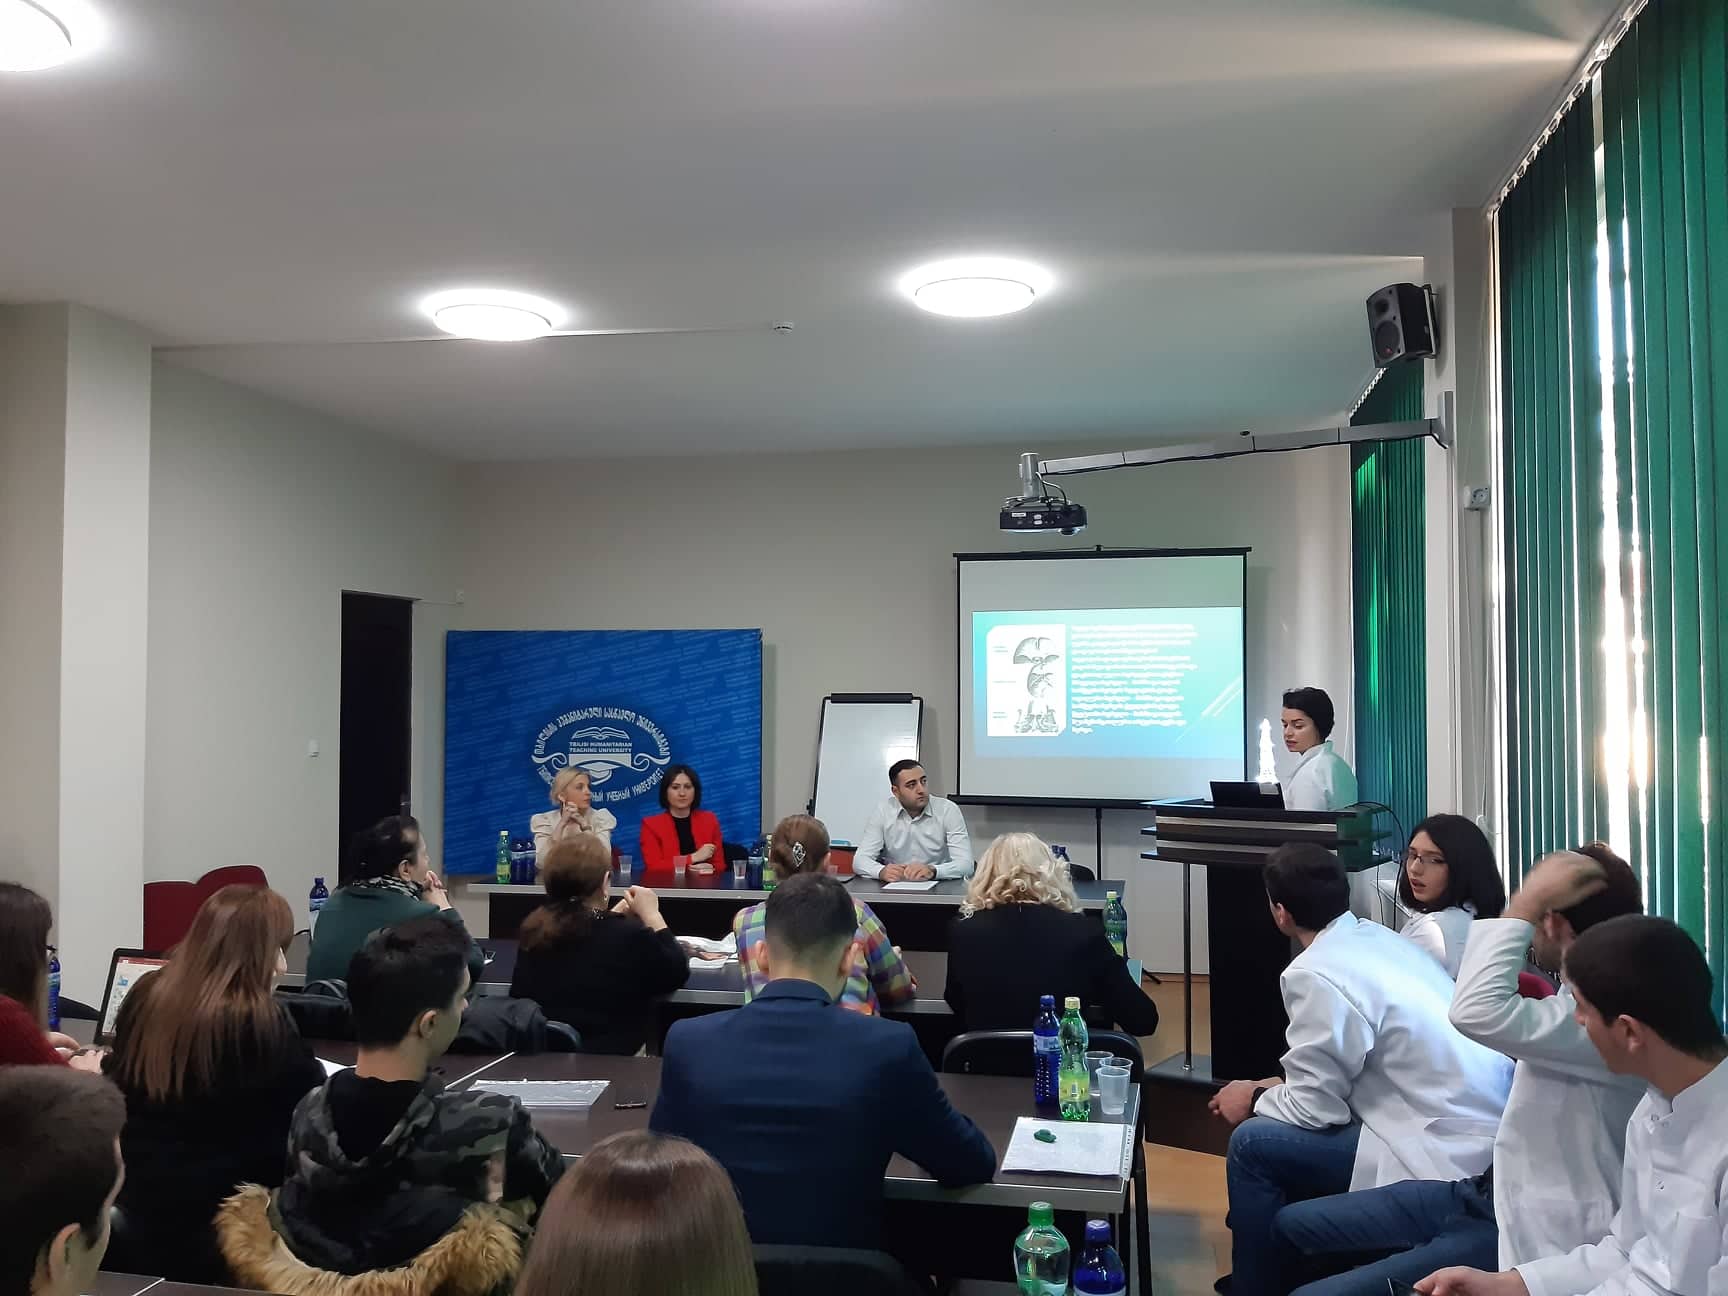 Student Conference of Tbilisi Humanitarian Teaching University